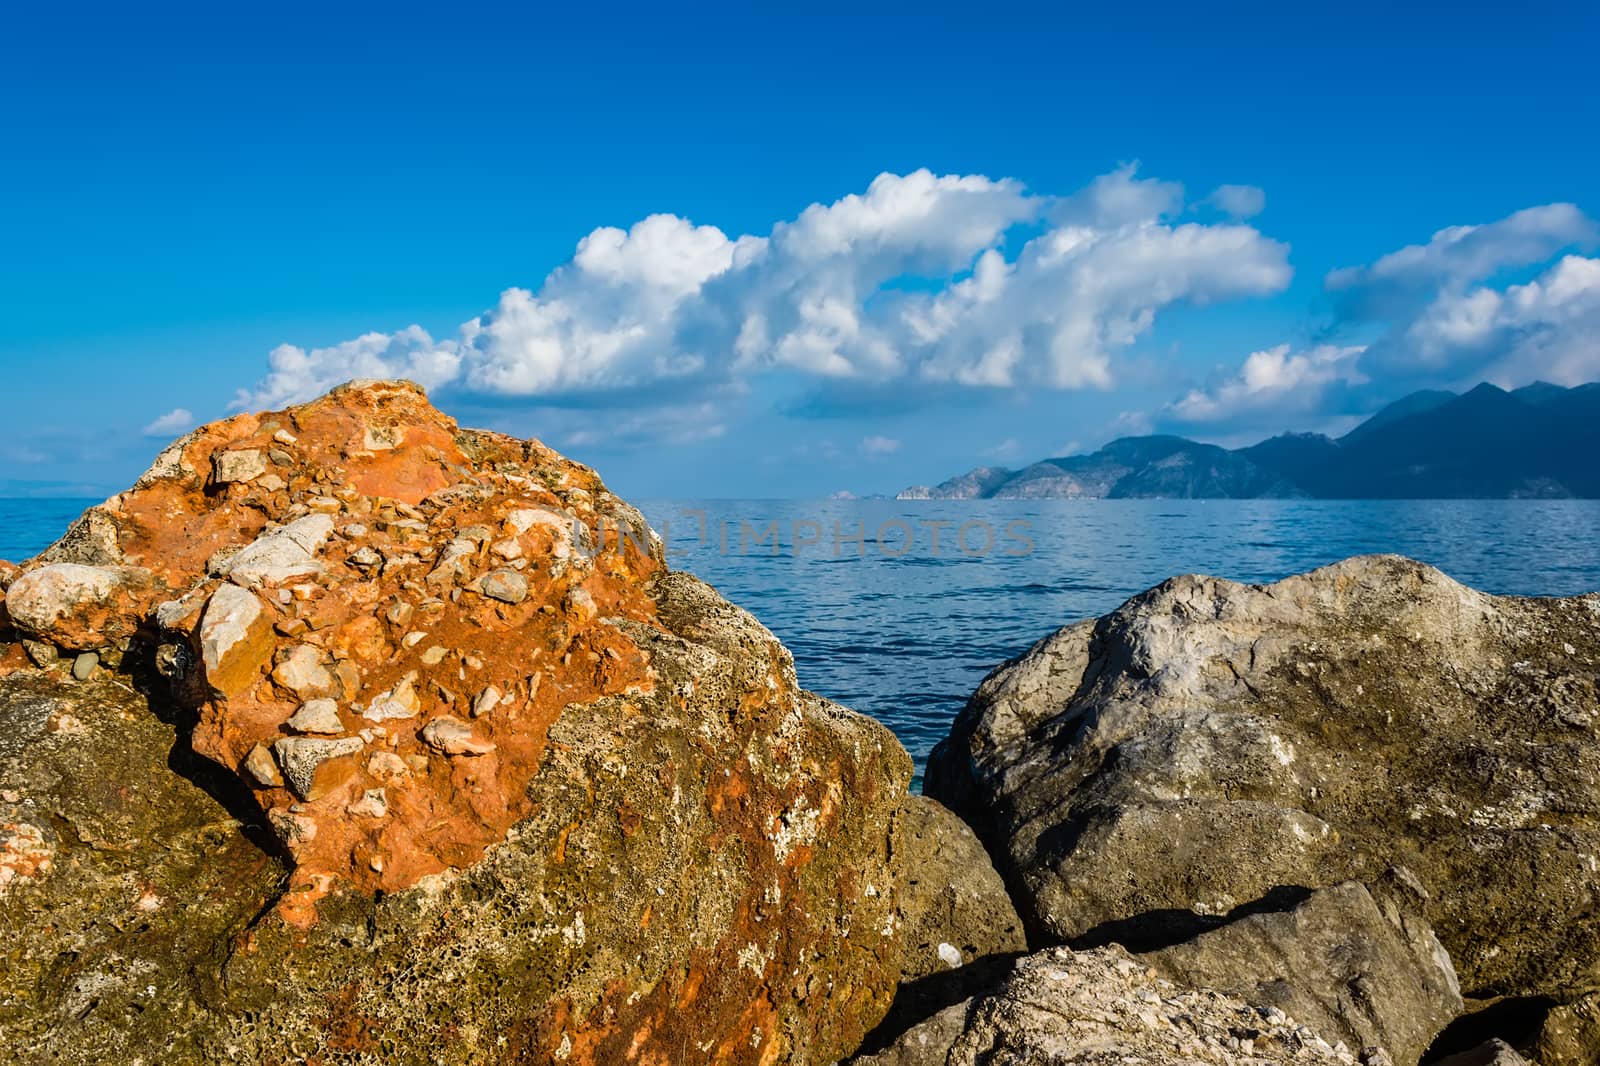 Day photo of Rocks, sea and blue sky with clouds